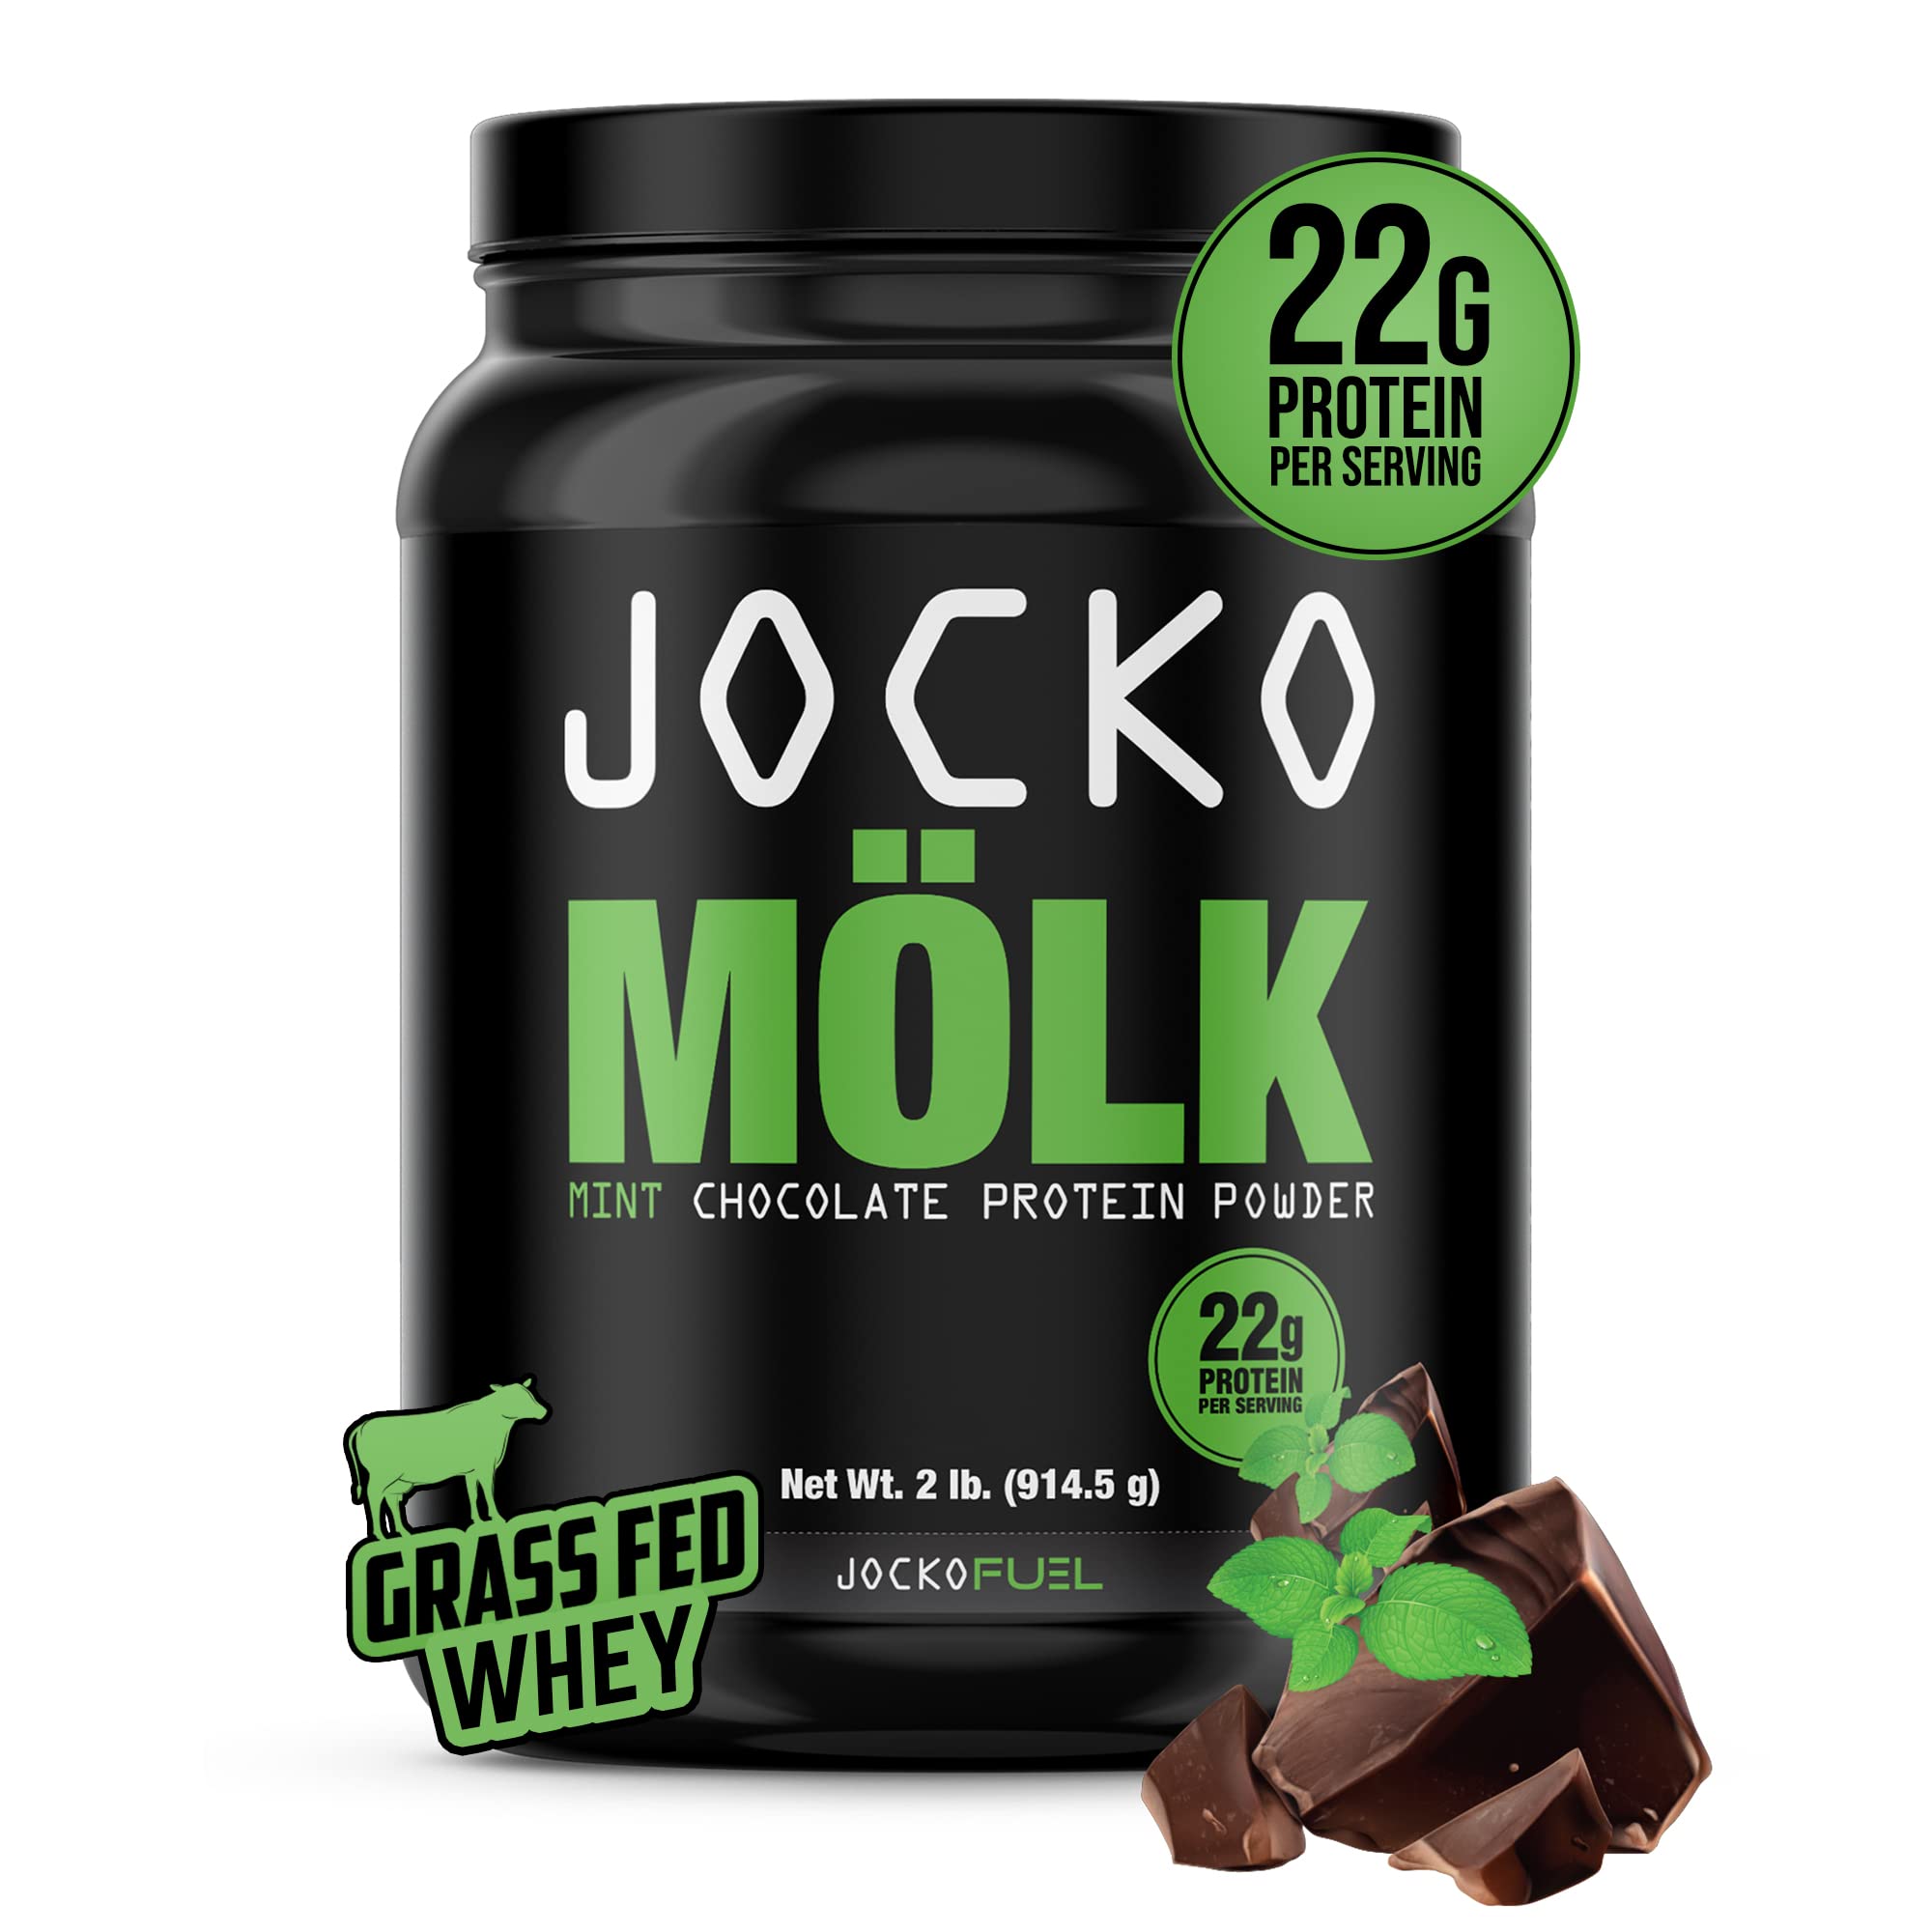 Book Cover Jocko Mölk Whey Protein Powder (Mint Chocolate) - Keto, Probiotics, Grass Fed, Digestive Enzymes, Amino Acids, Sugar Free Monk Fruit Blend - Supports Muscle Recovery and Growth - 31 Servings Mint Chocolate 31 Servings (Pack of 1)